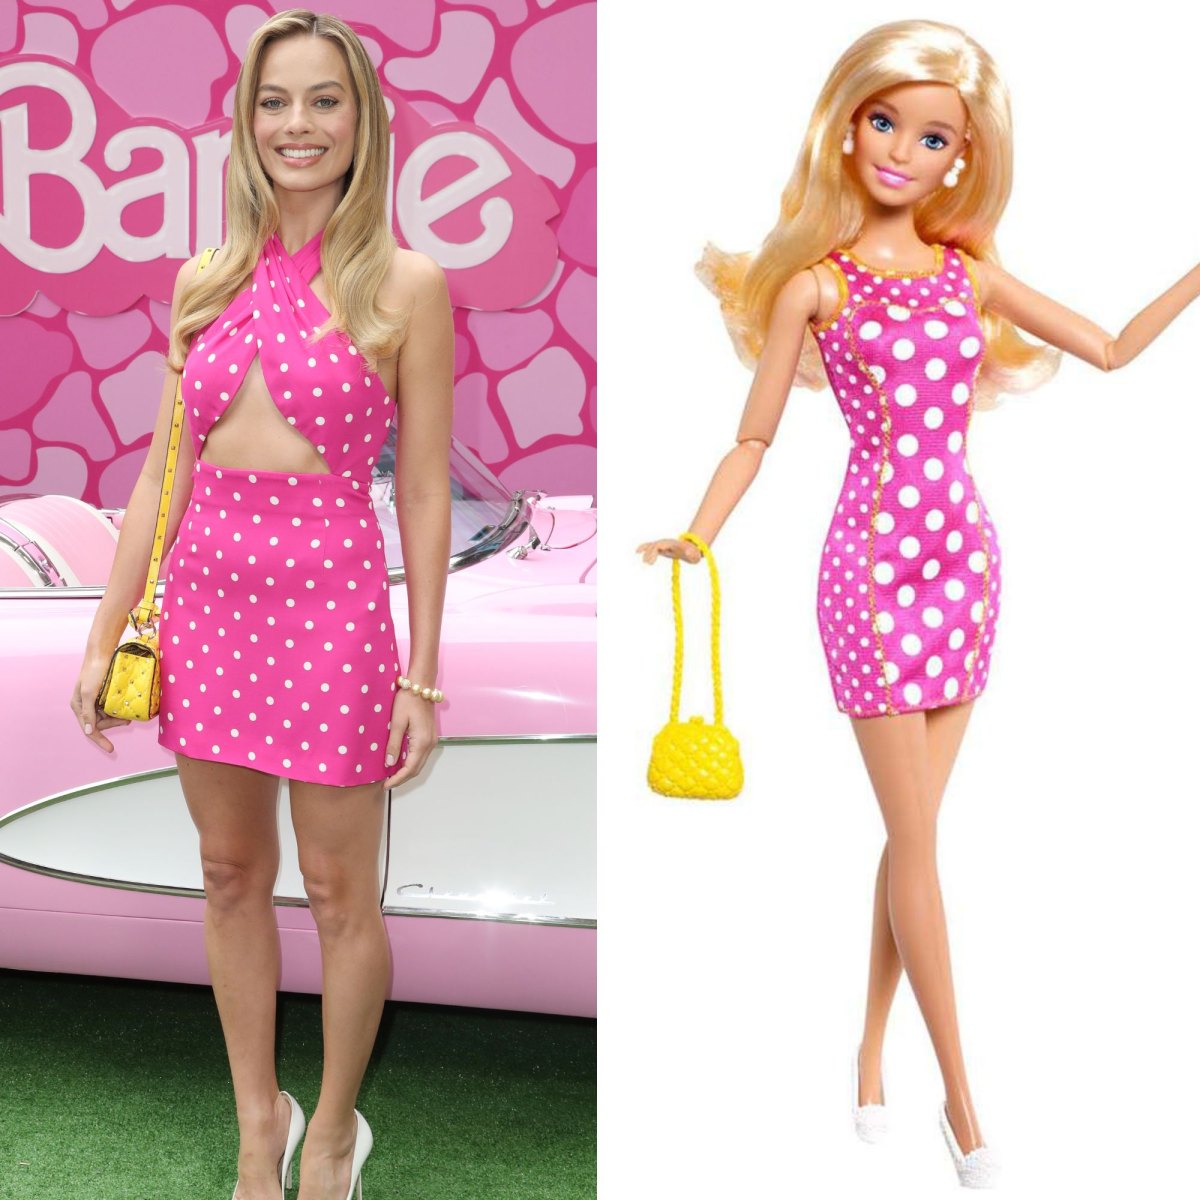 5 Barbie shoes Margot Robbie wore for her recent movie premiers